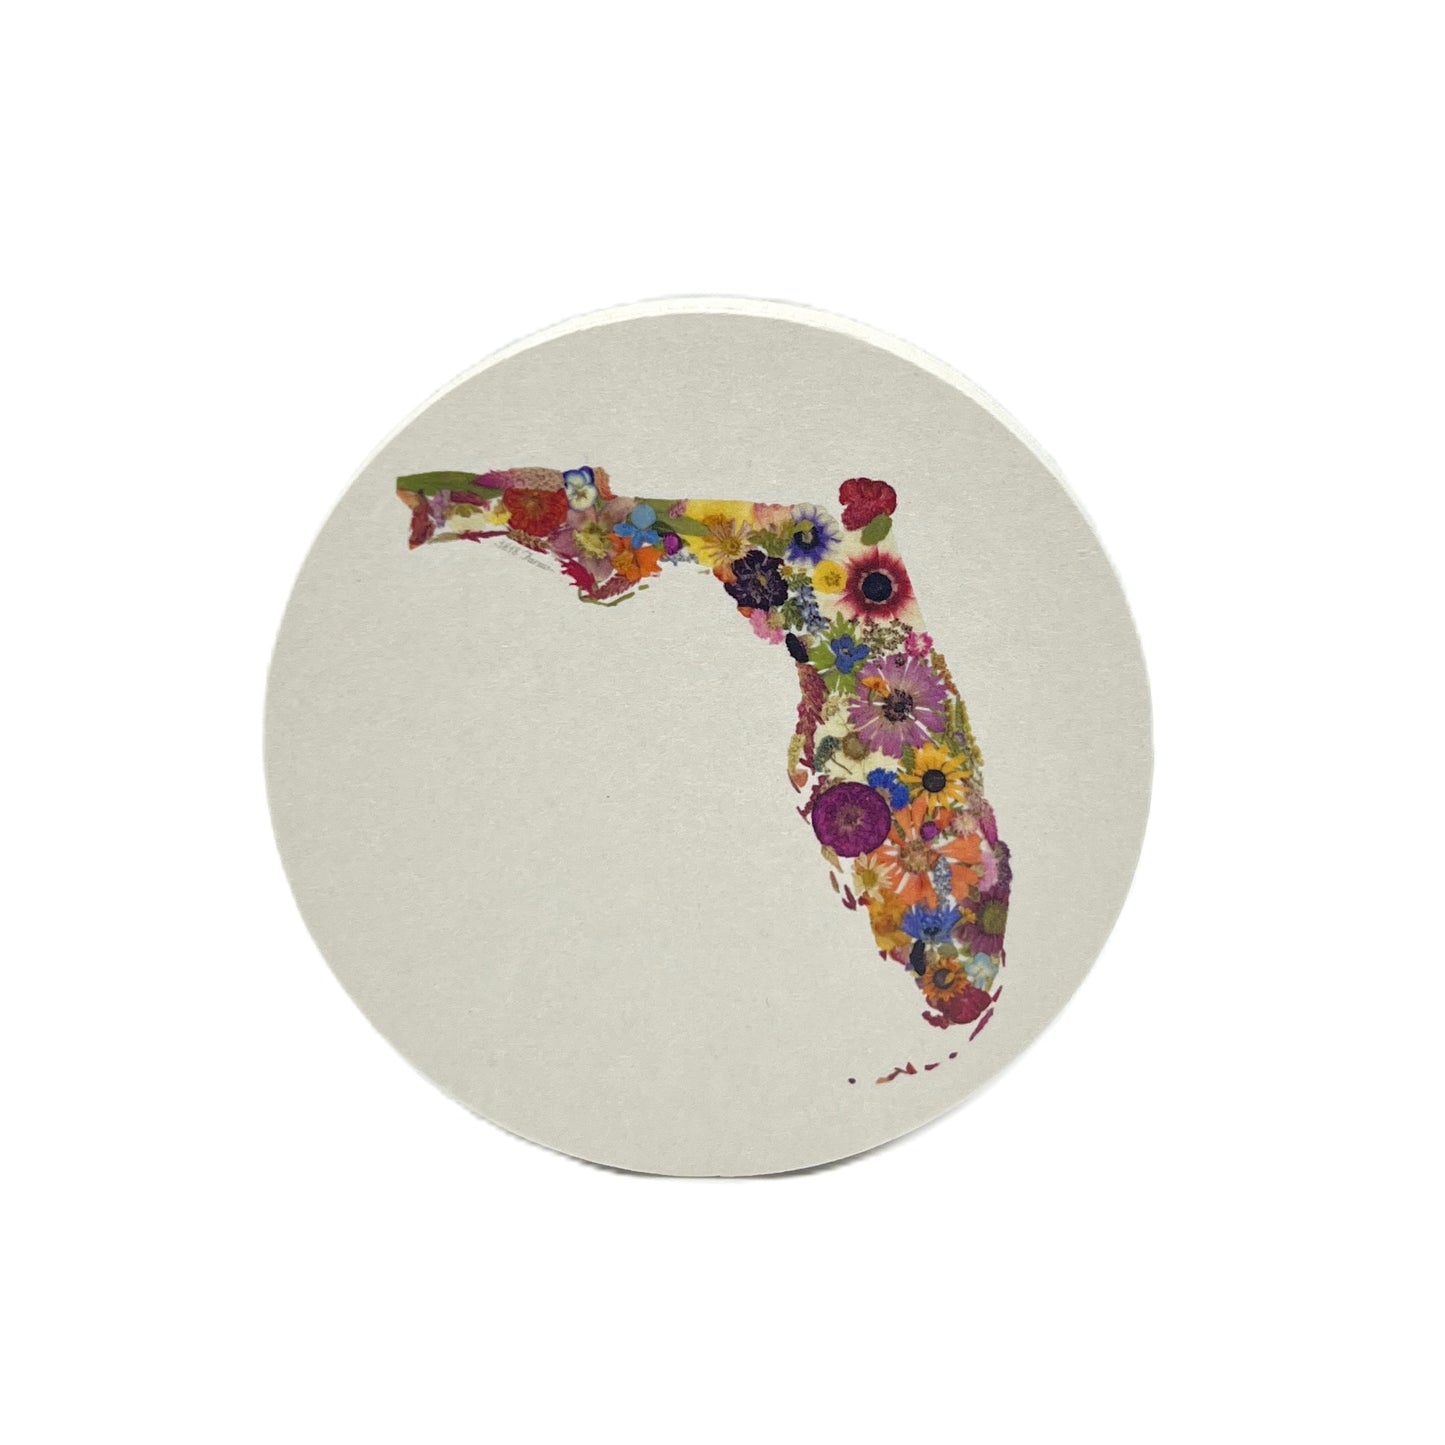 State Themed Drink Coasters (Set of 6) Featuring Dried, Pressed Flowers - "Where I Bloom" Collection Coaster 1818 Farms Florida  